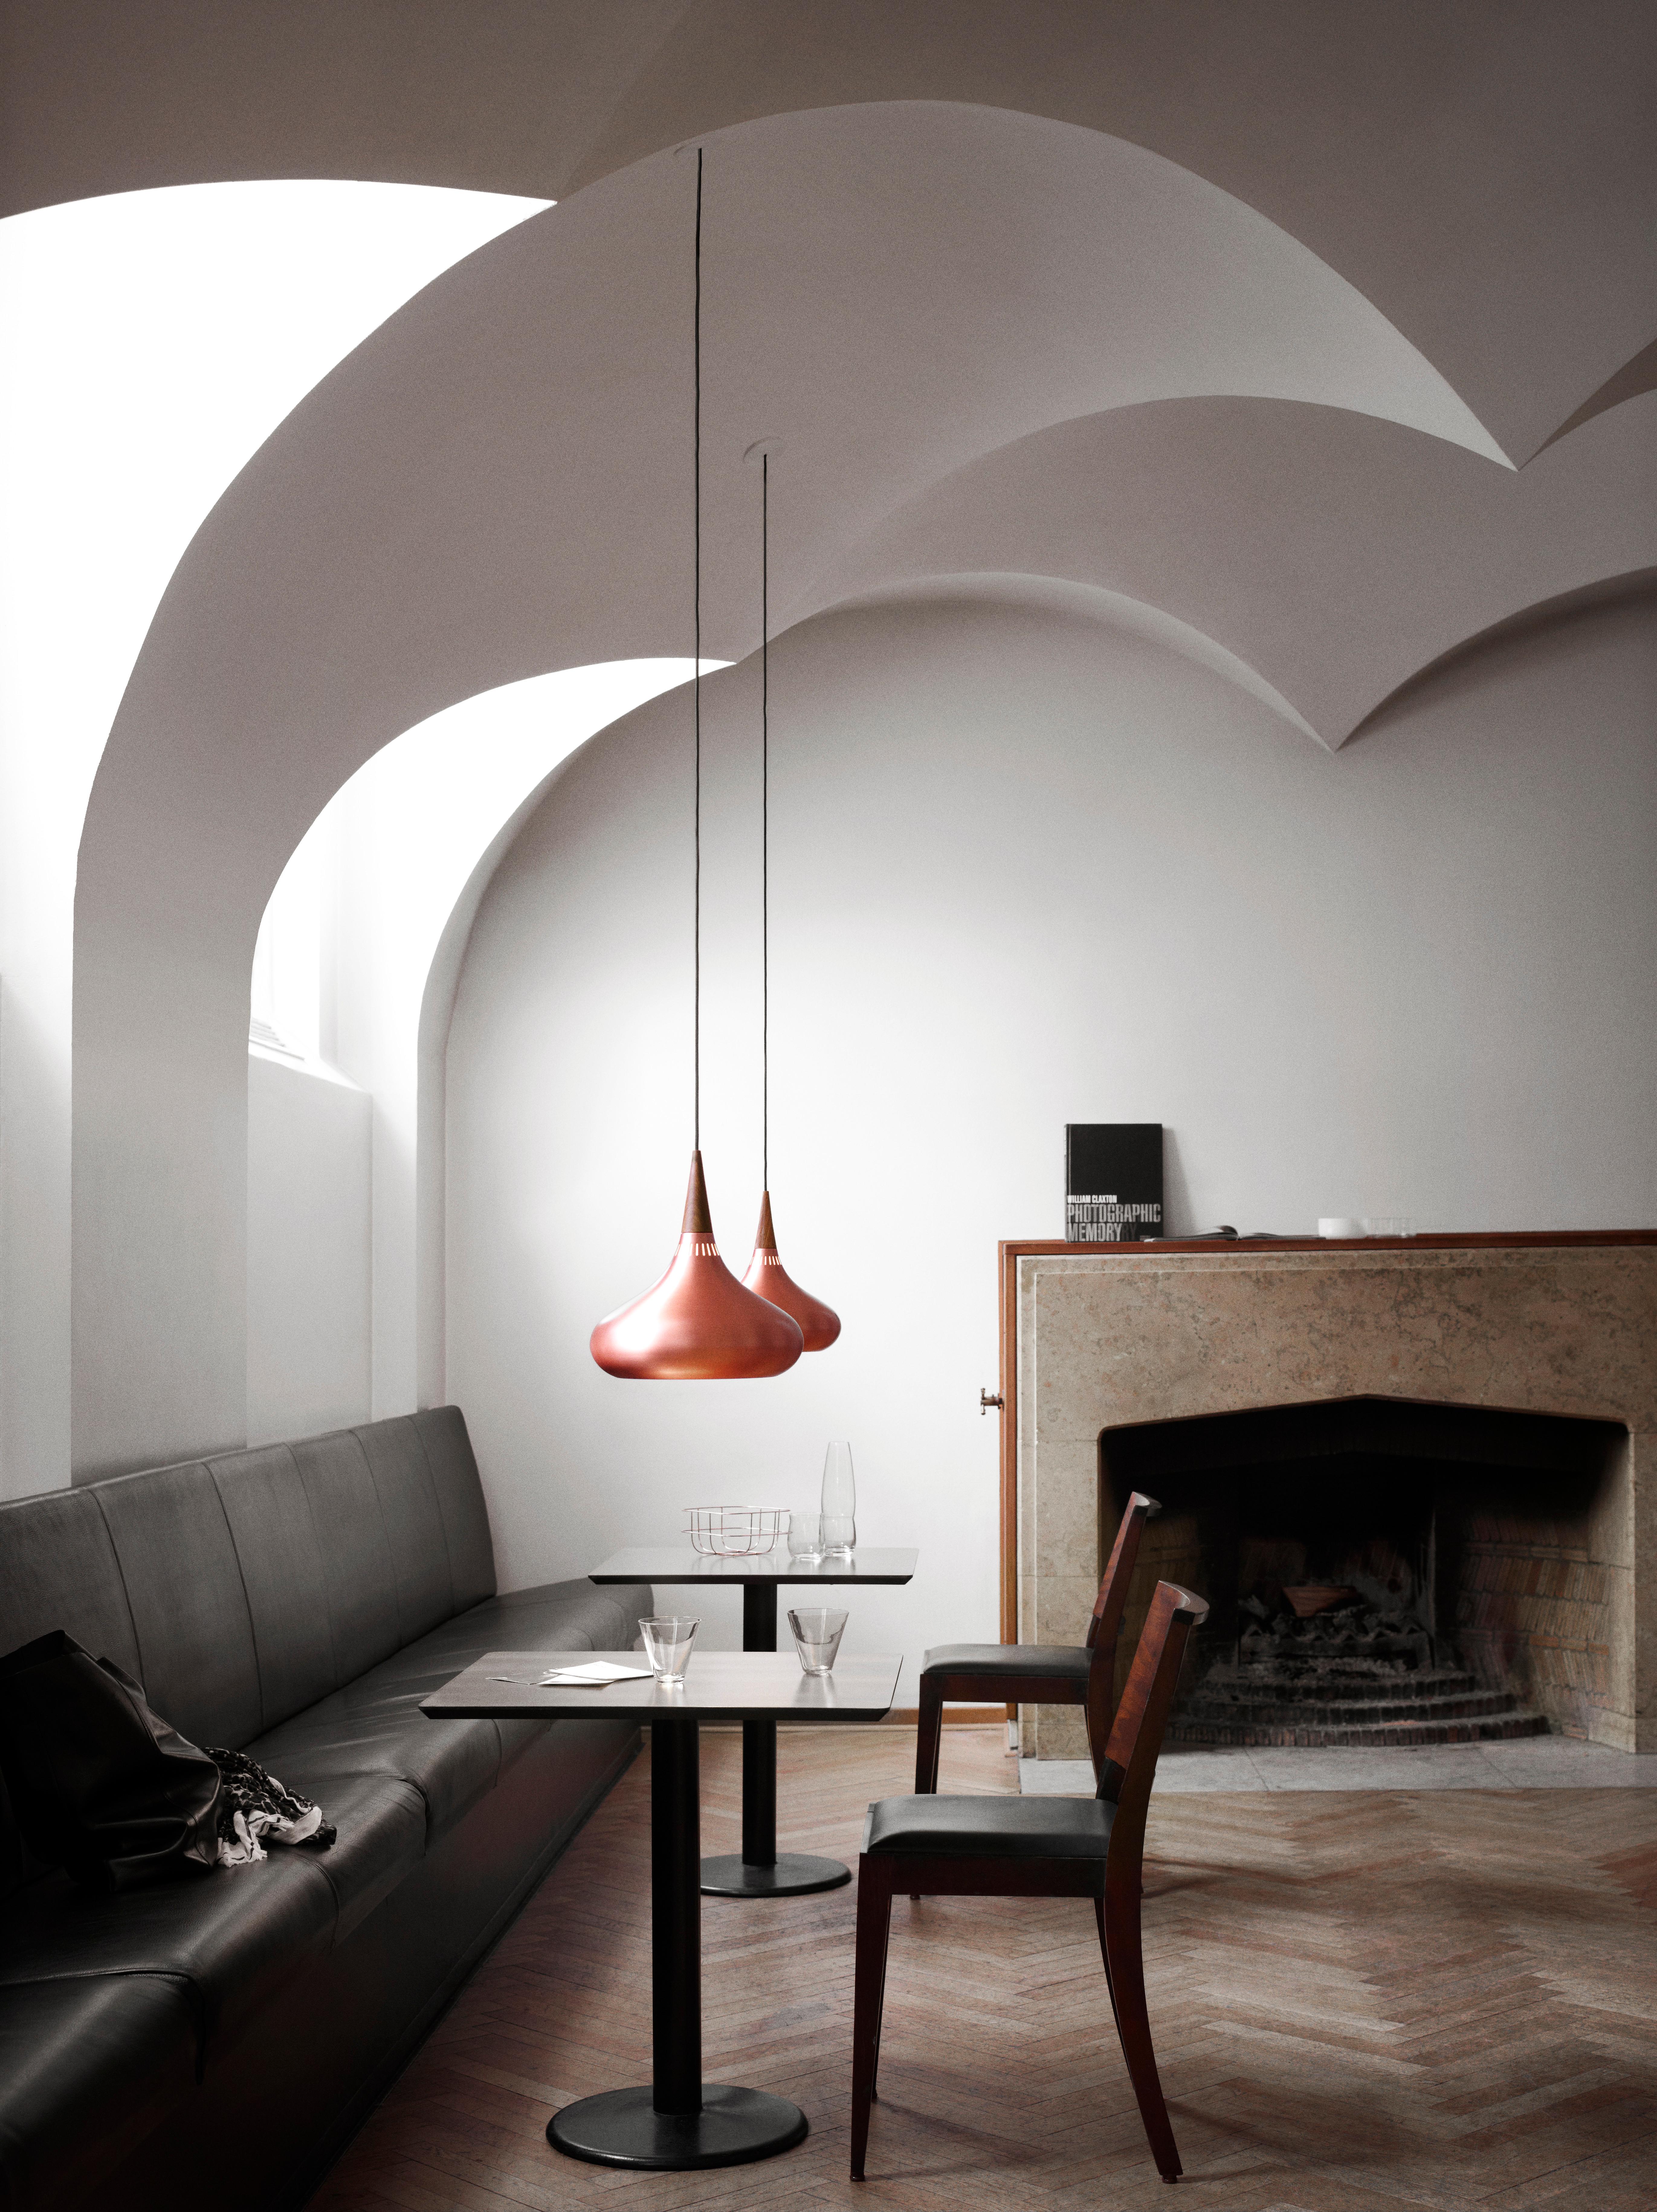 Jo Hammerborg 'Orient' Pendant Lamp for Fritz Hansen in Copper and Rosewood.

Established in 1872, Fritz Hansen has become synonymous with legendary Danish design. Combining timeless craftsmanship with an emphasis on sustainability, the brand’s